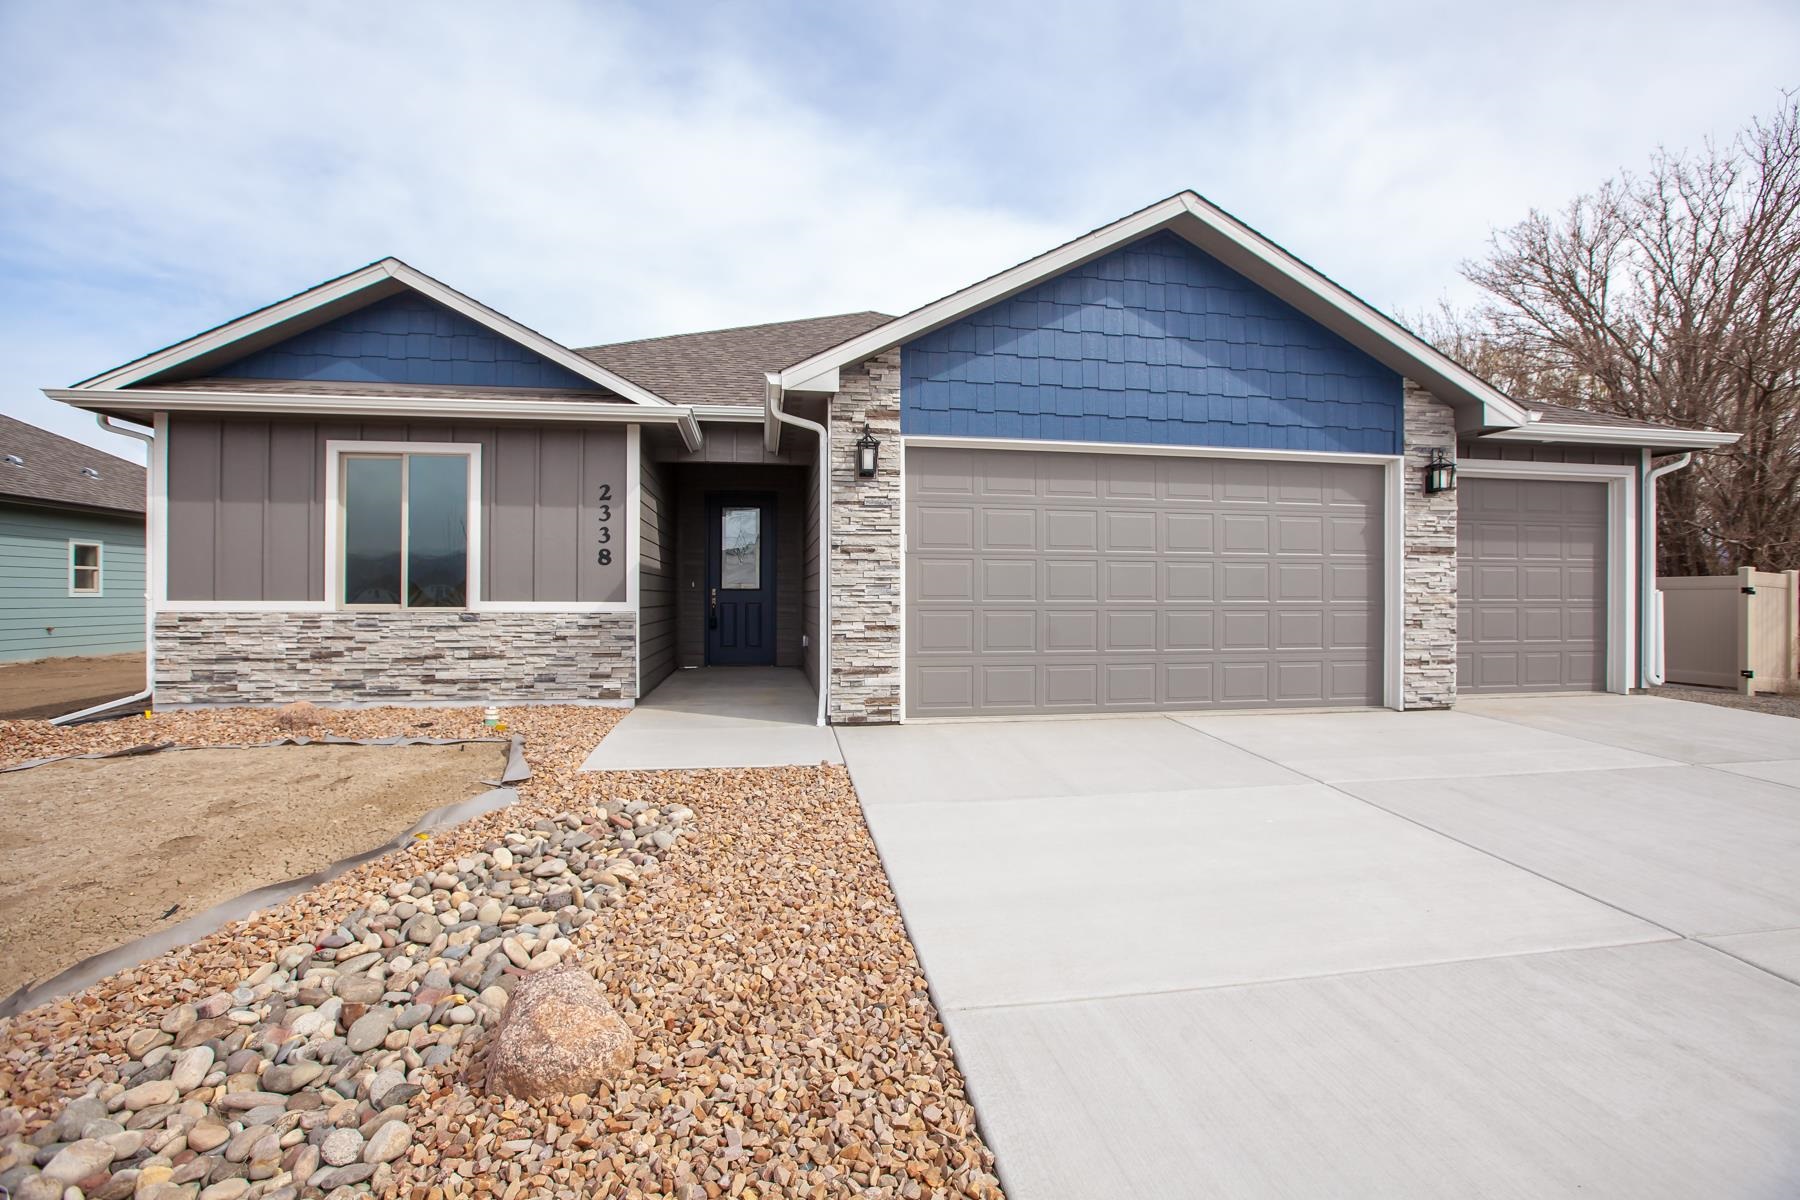 Beautiful new construction by CRM Homes. This home is 1961 square feet and boasts beautiful finishes. Open living area, lovely windows, large granite island with breakfast bar, and a gas range. Refrigerated central air, covered patio, and a 3 car garage. Landscaping is included!!